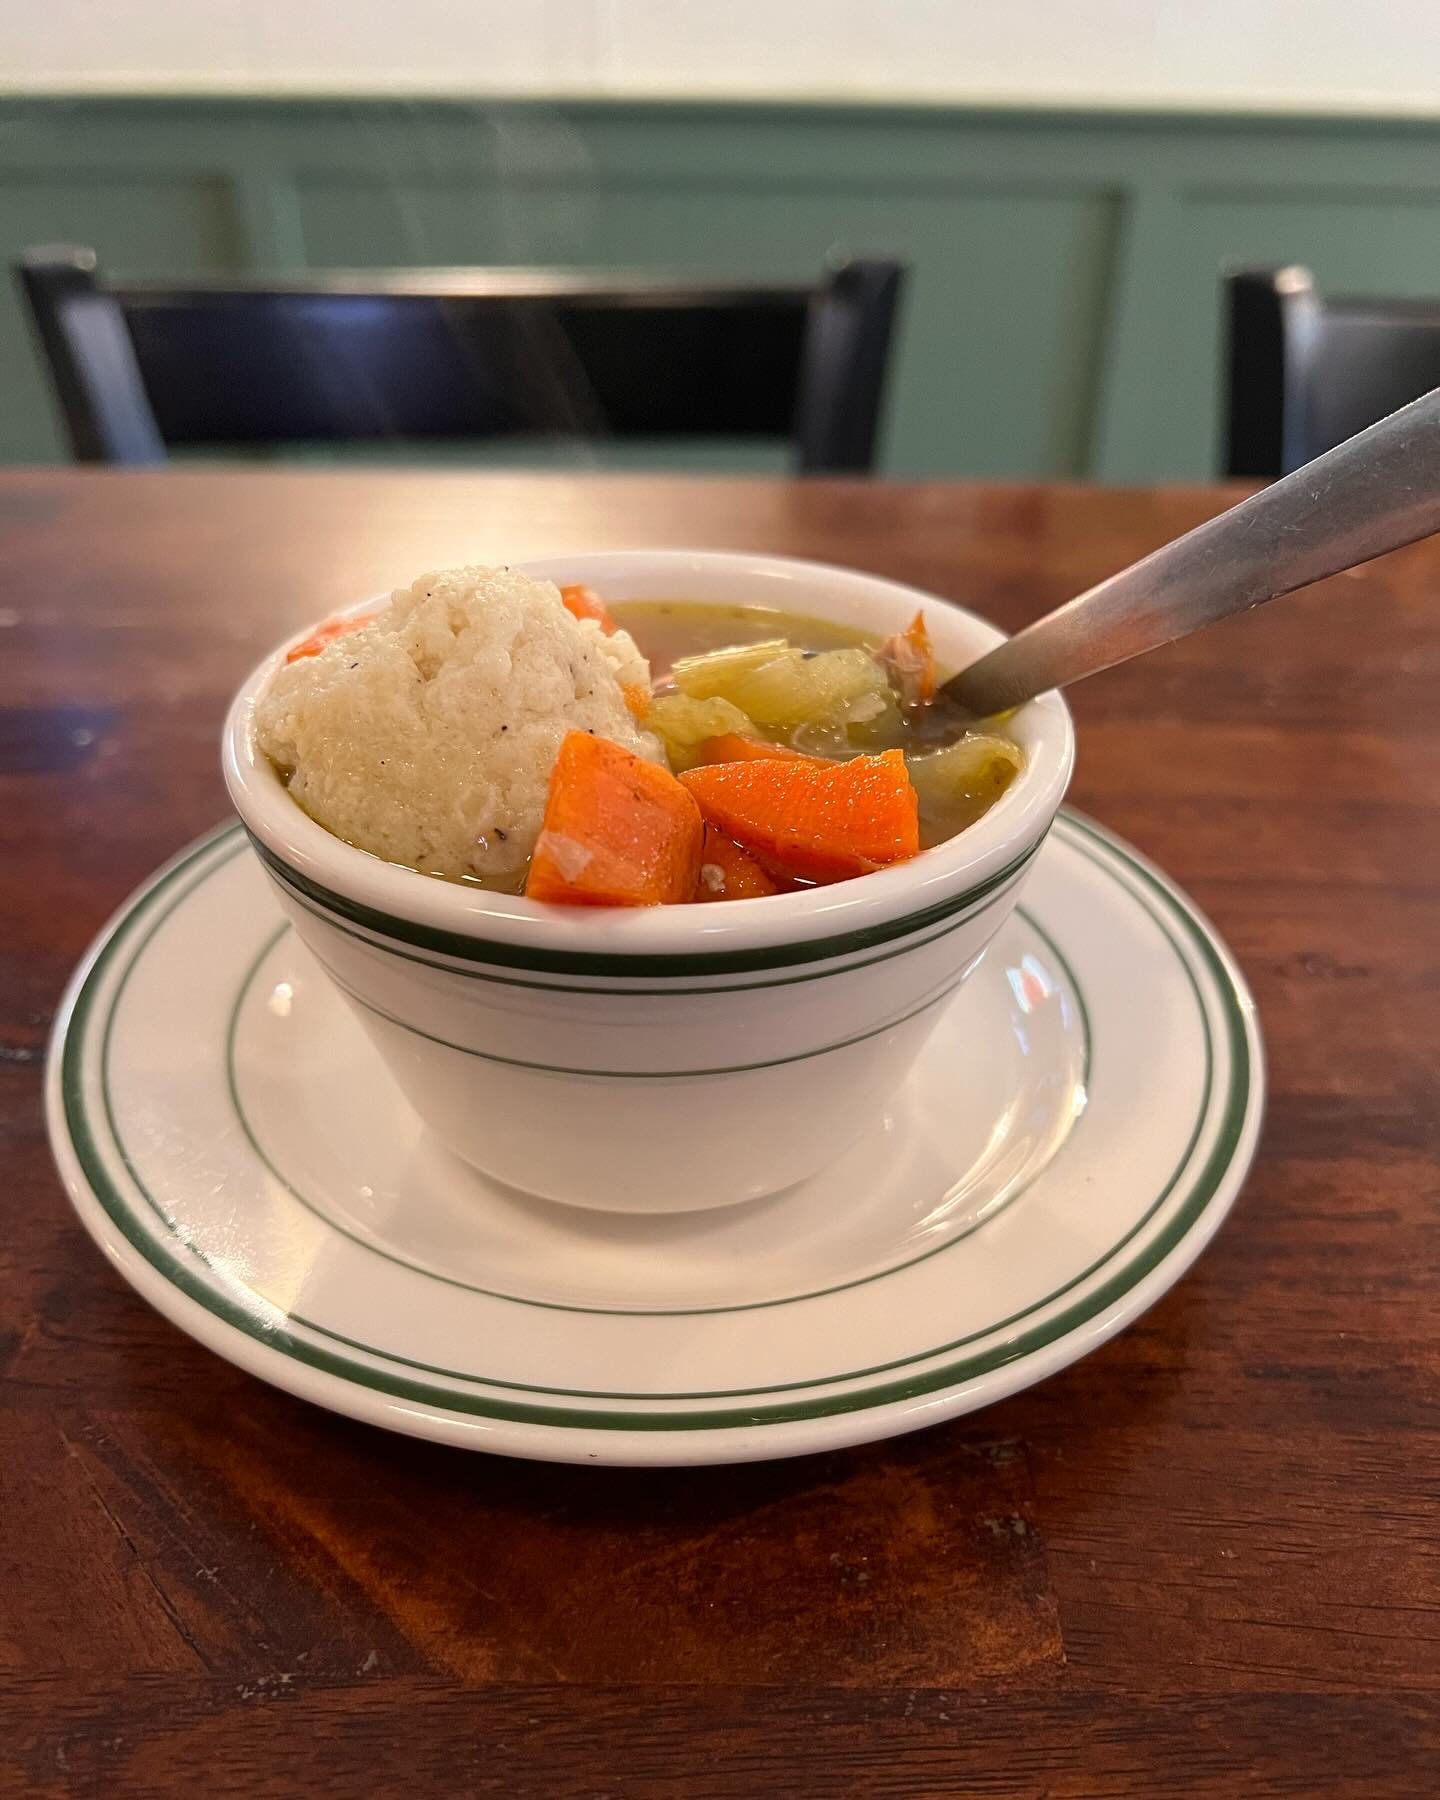 Specials this week: Beer Battered Green Beans; Bell Pepper, Corn, &amp; Cabbage Fritters; Chicken Pot Pie (last weekend for it &lsquo;til Fall!); Matzoh Ball Soup (cup of it pictured: dang-near guaranteed to cure what ails ya); and Strawberry Ricotta